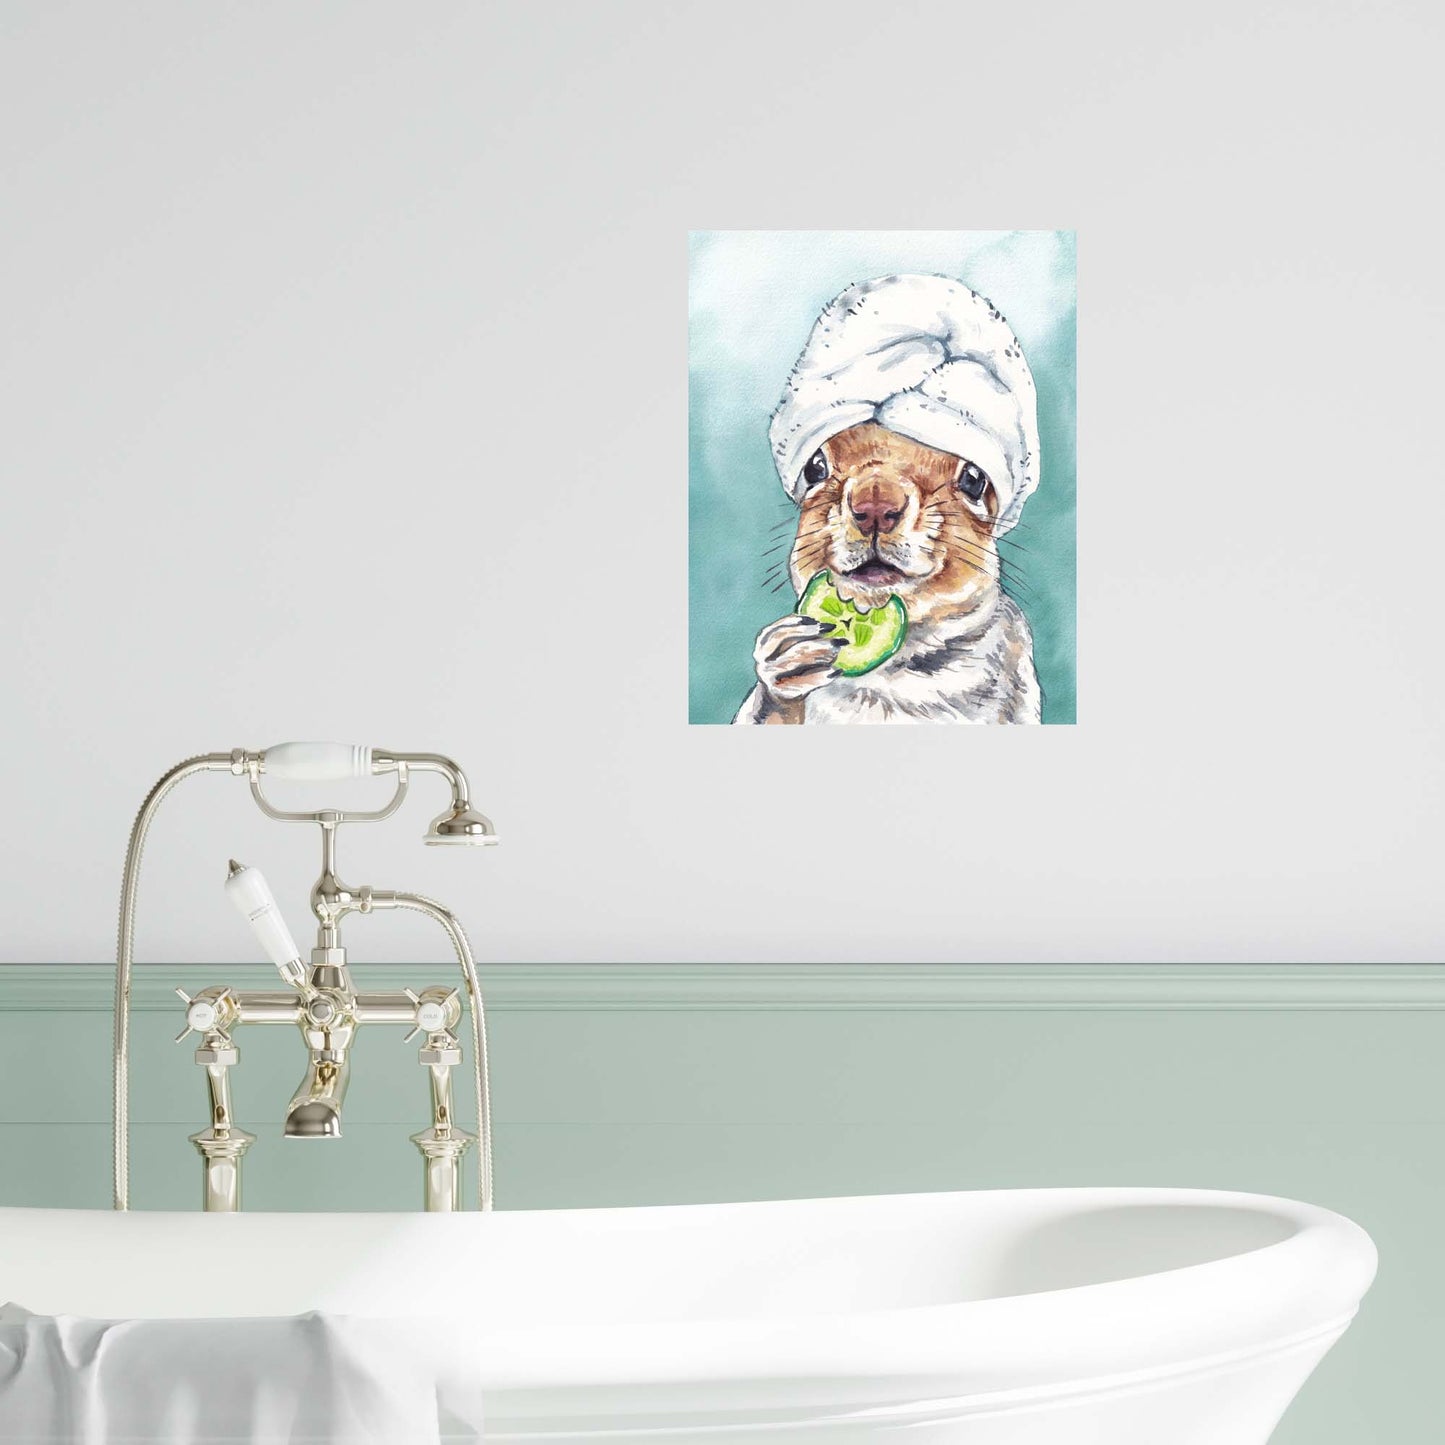 Spa Day Squirrel Wall Decal